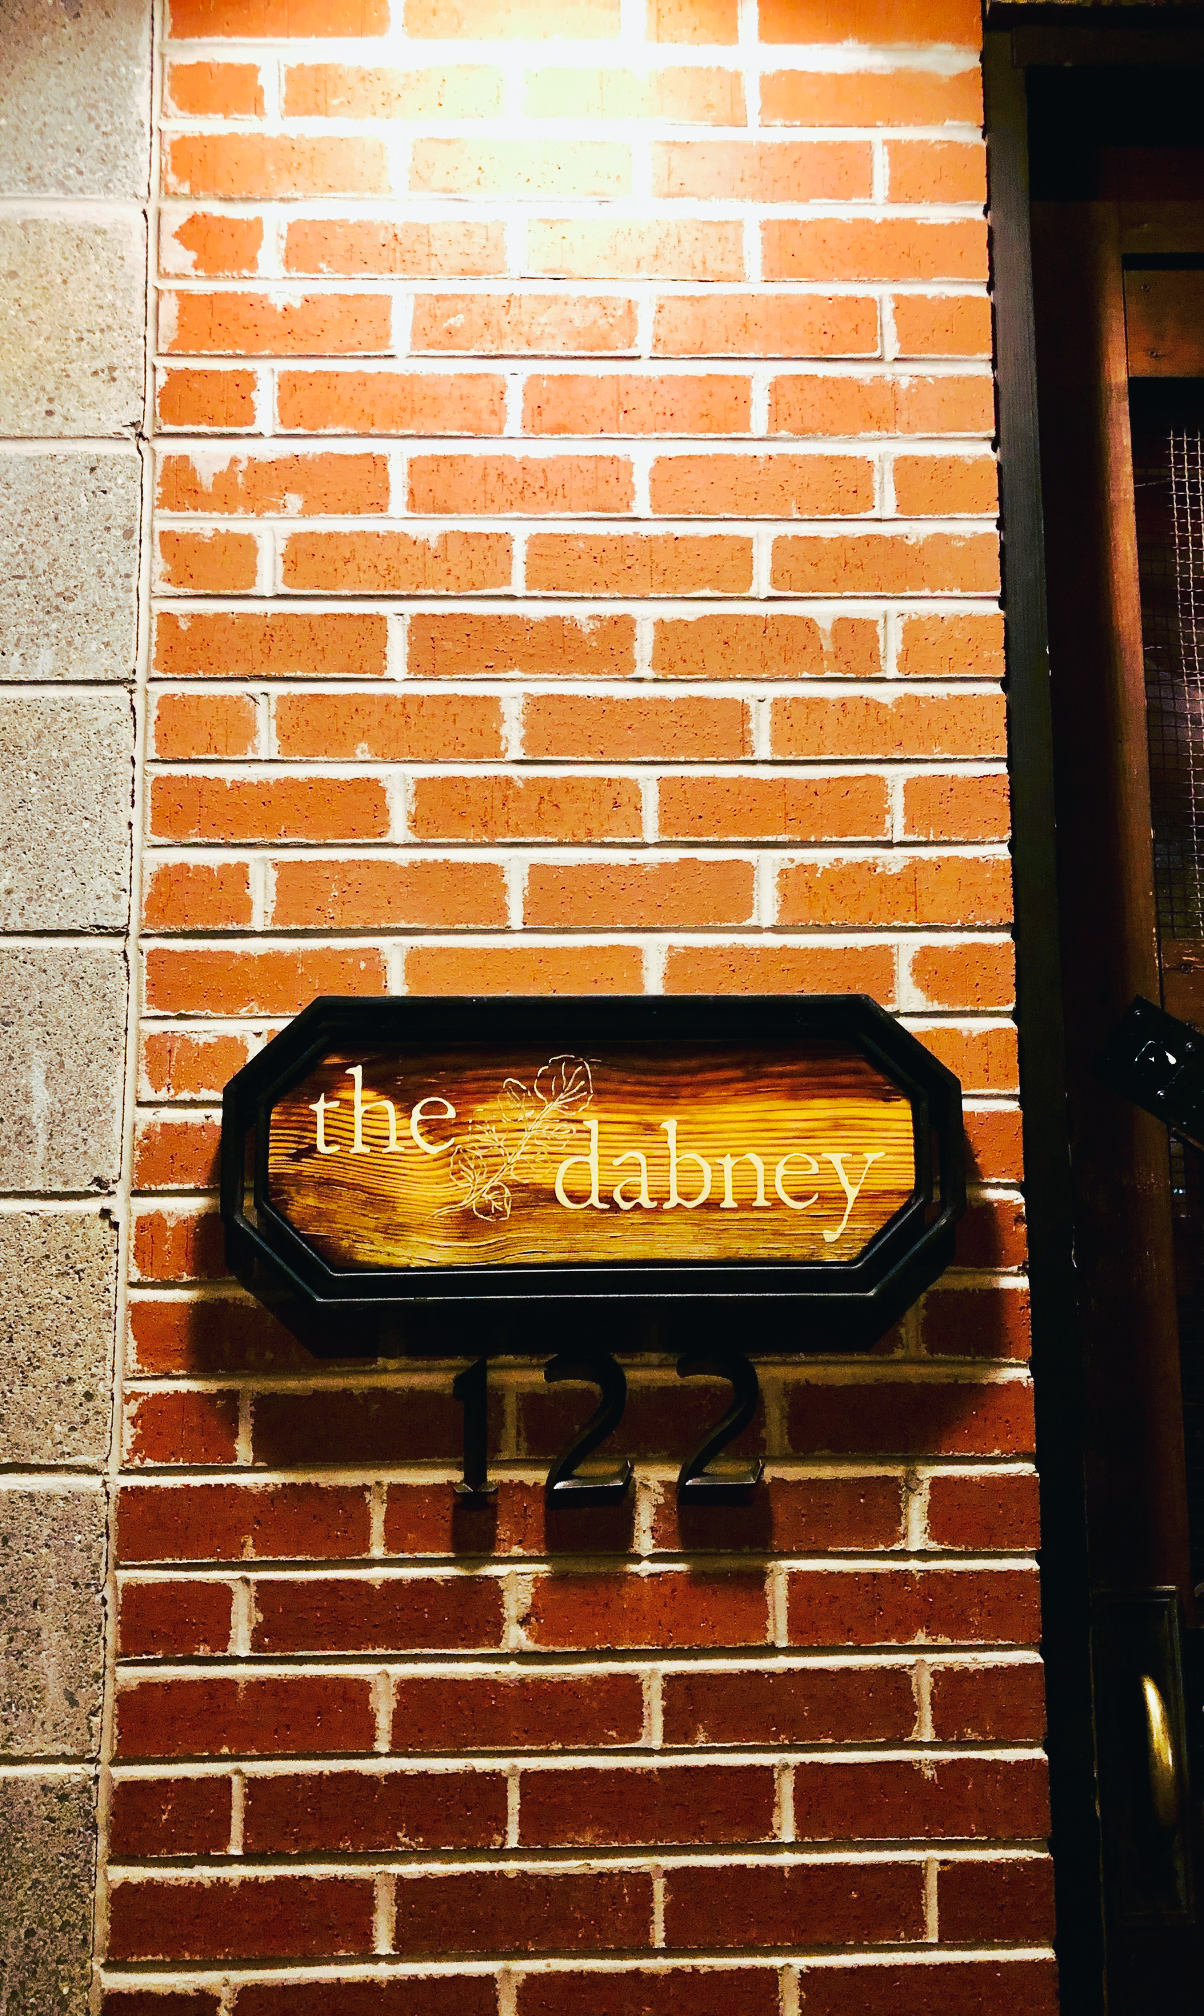 The Danbey